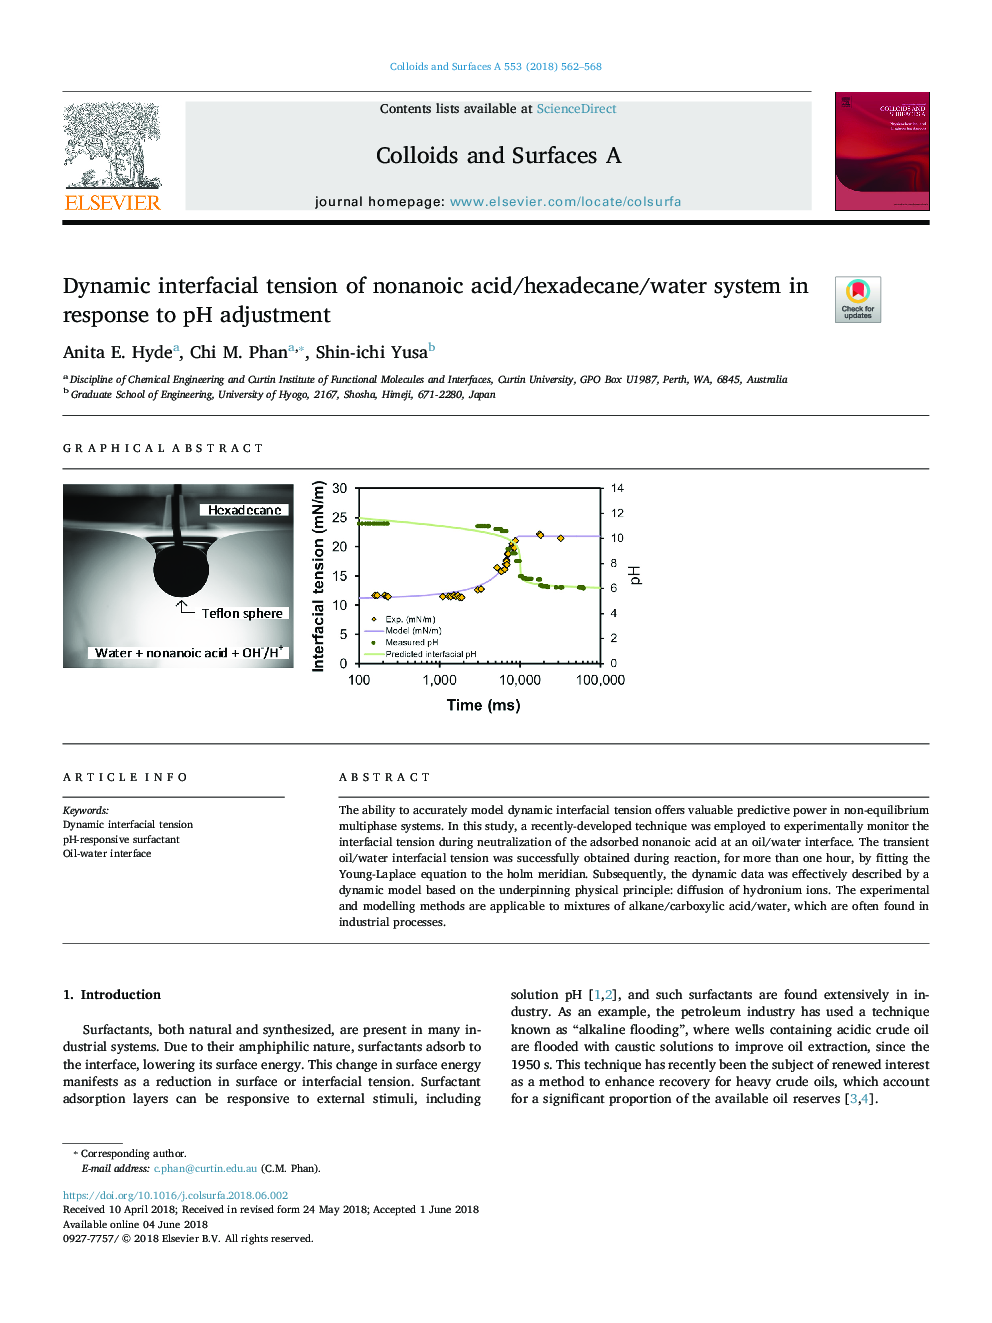 Dynamic interfacial tension of nonanoic acid/hexadecane/water system in response to pH adjustment